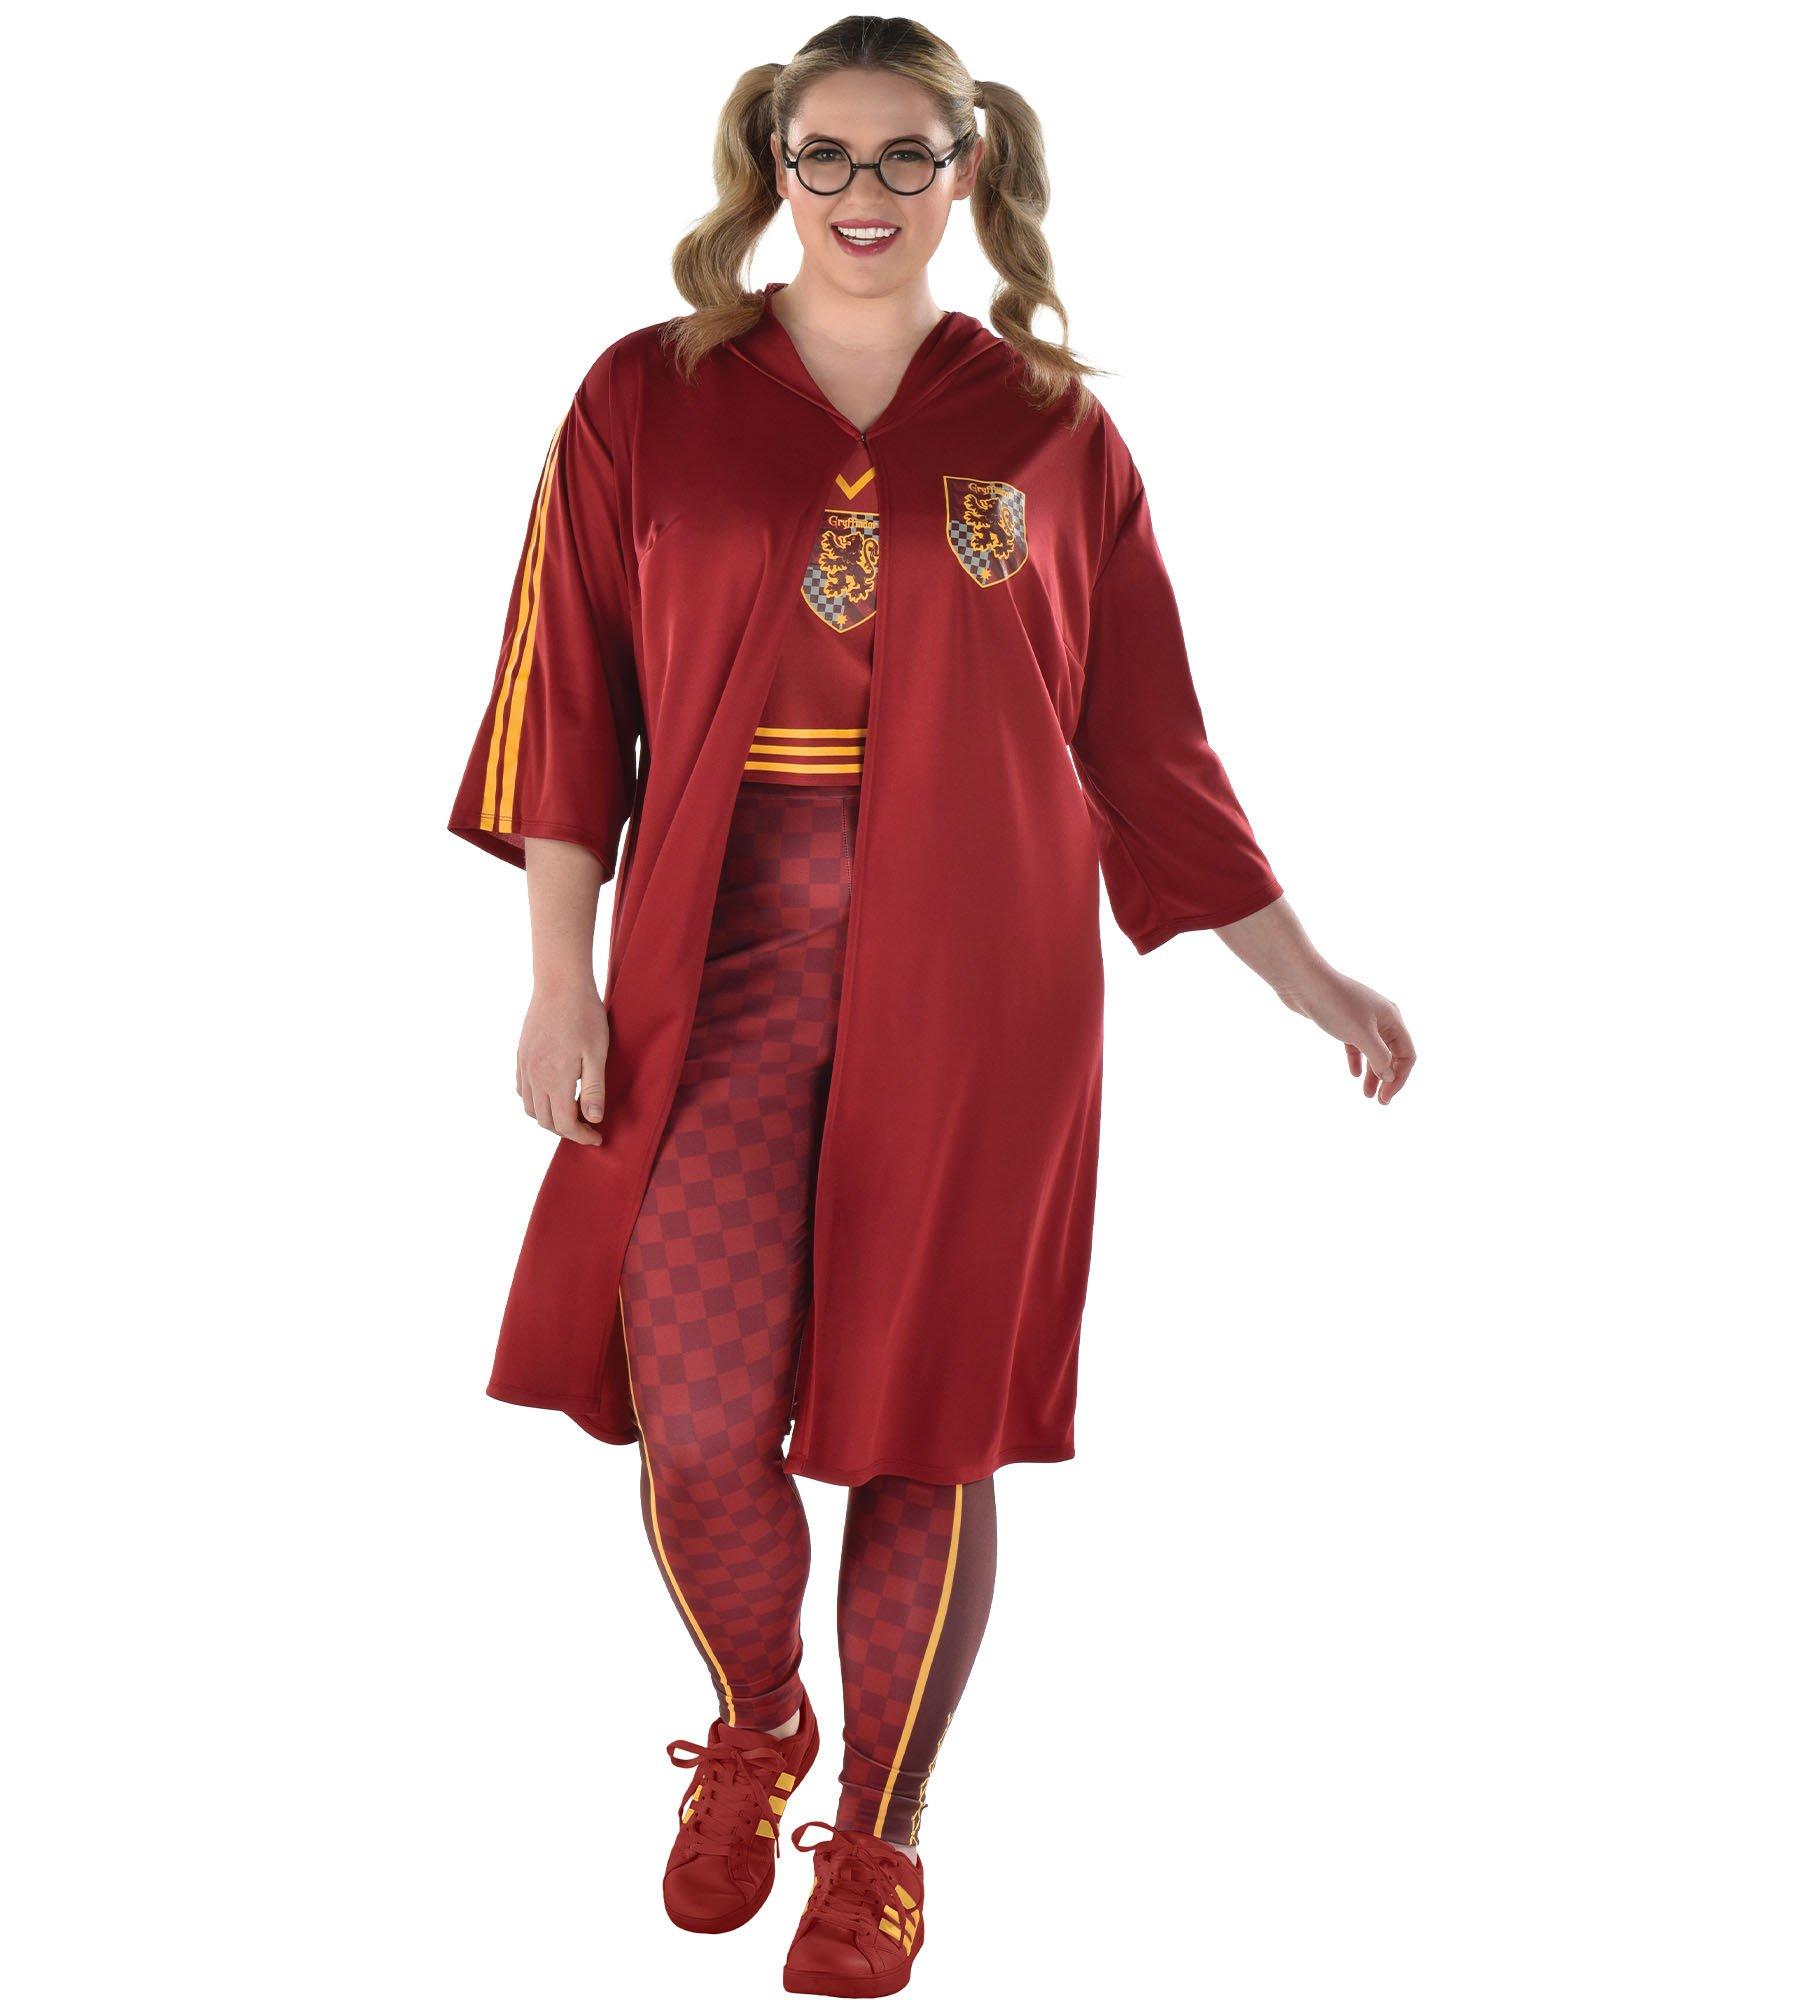 Adult Plus Size Deluxe Harry Potter Gryffindor Robe Costume